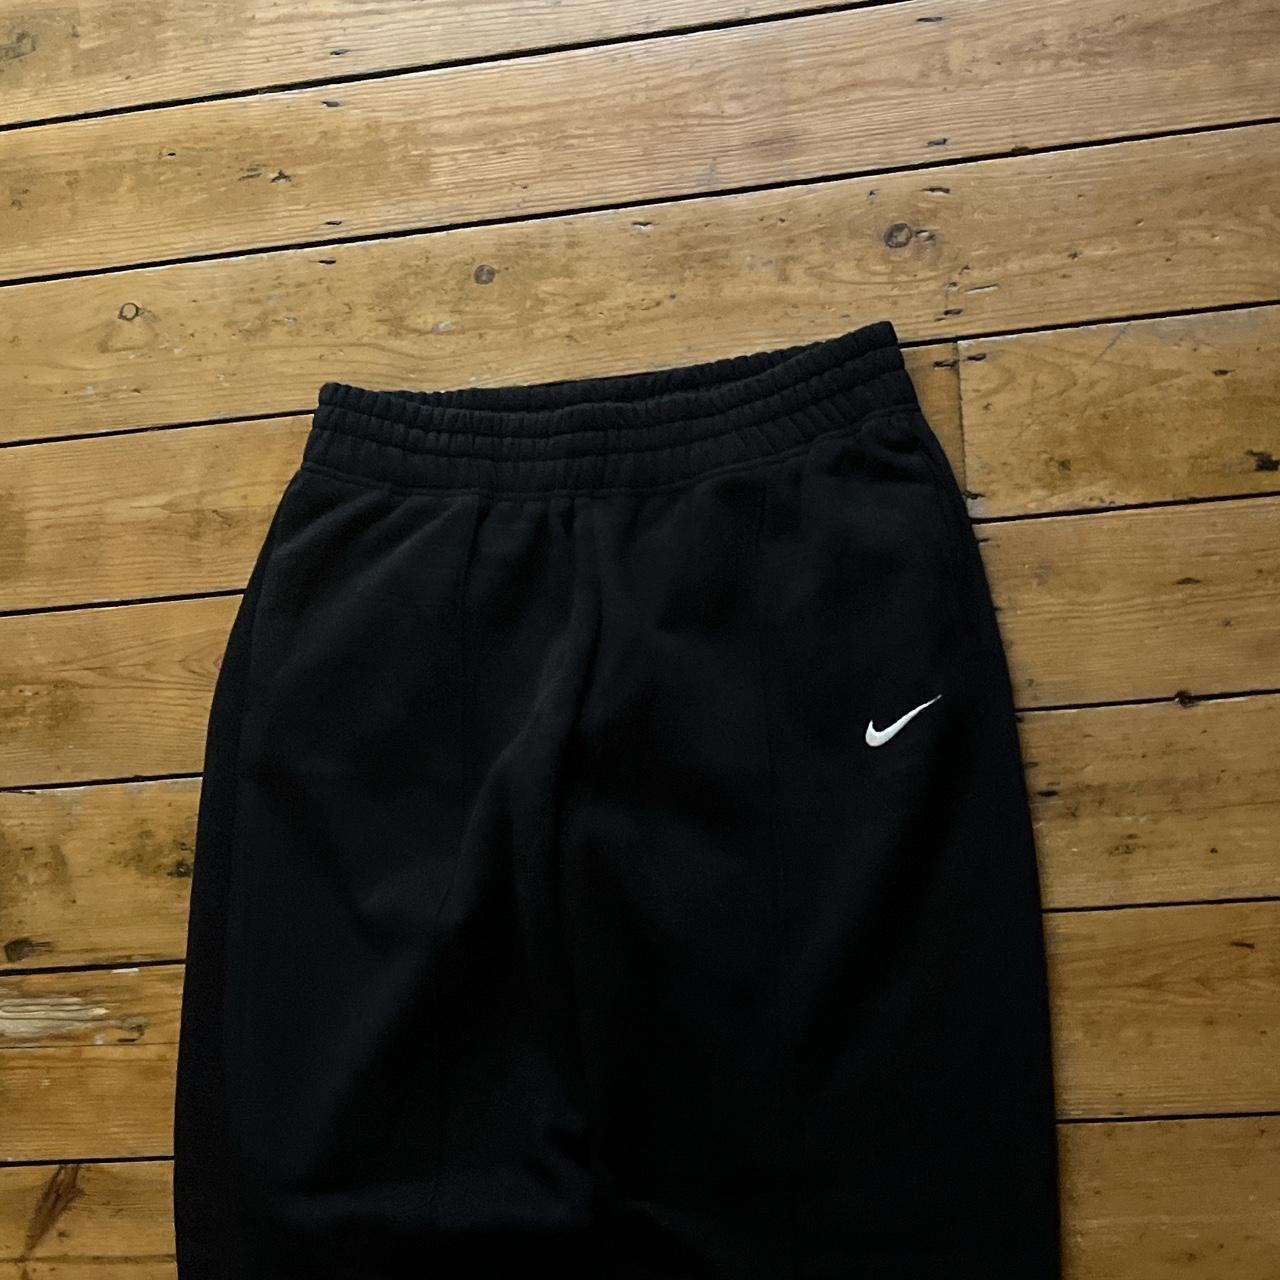 Super sick baggy Nike joggers in black with a white... - Depop